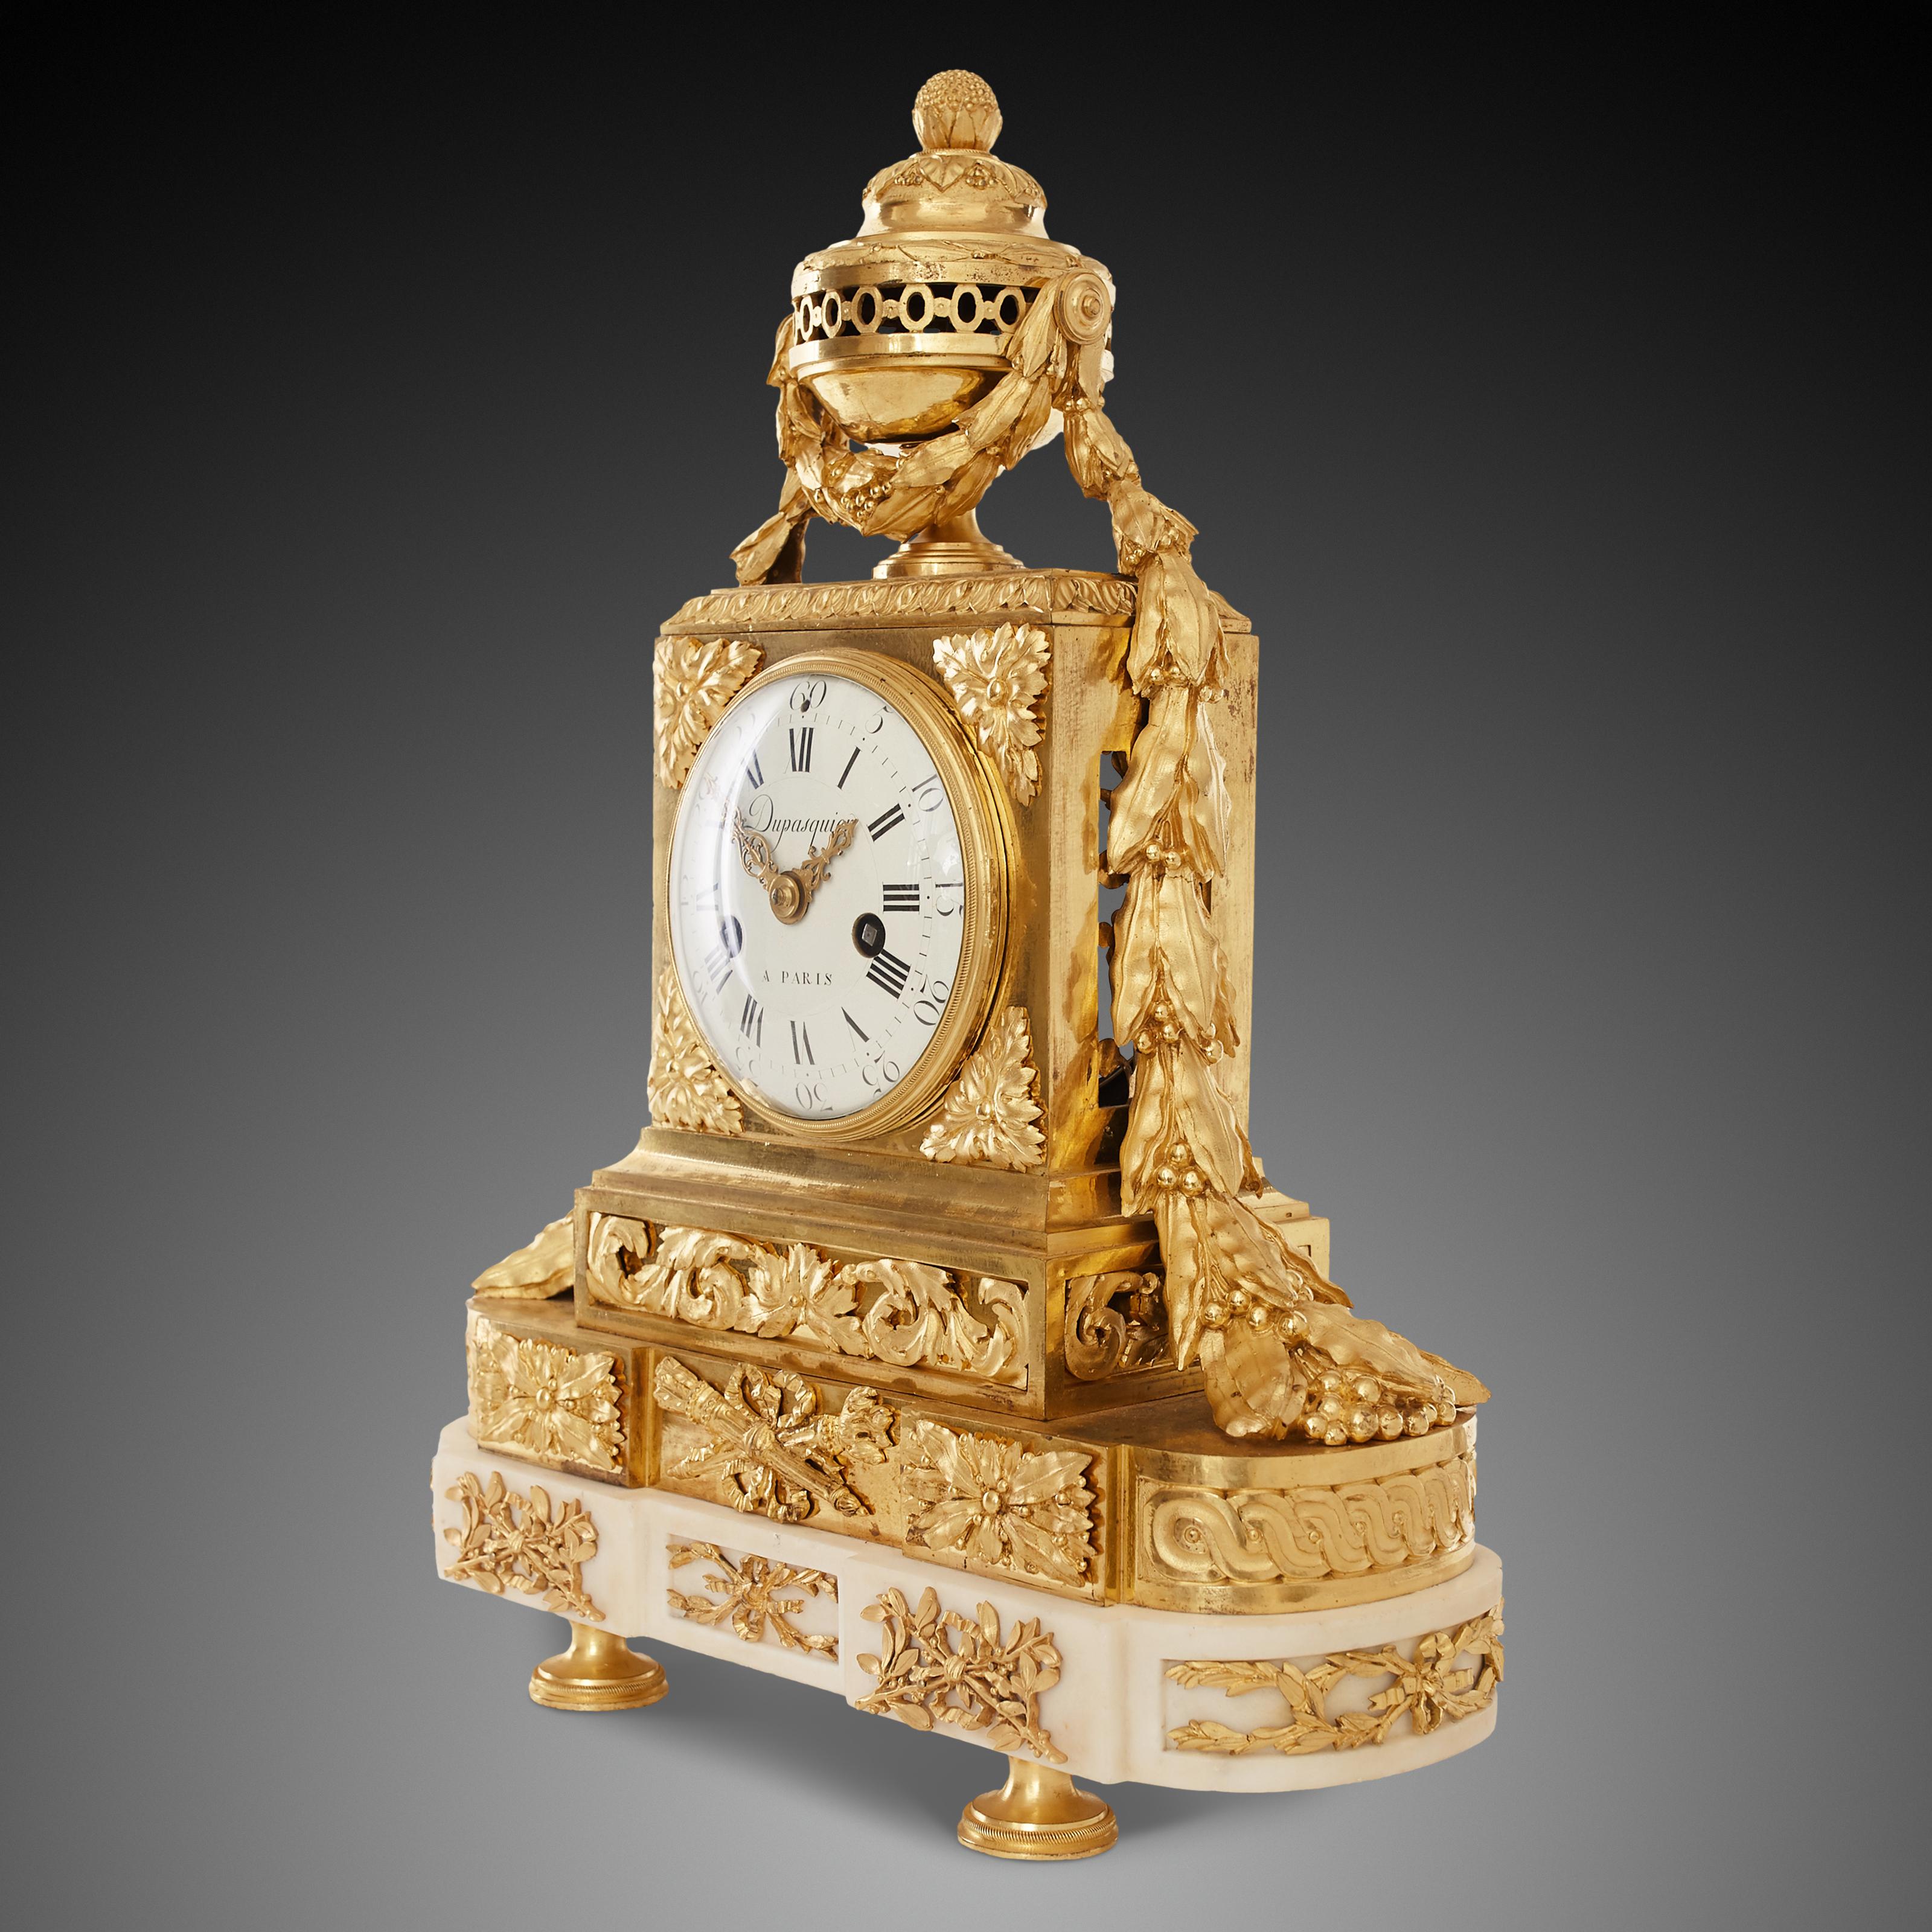 The outstanding mantel clock is in the style of Louis XV – Louis Seize (1774-1792). Royal breath appears in each motif. Almost the entire upper part of the clock is inlaid with ormolu but only the pedestal is made of extremely delicate ivory-white